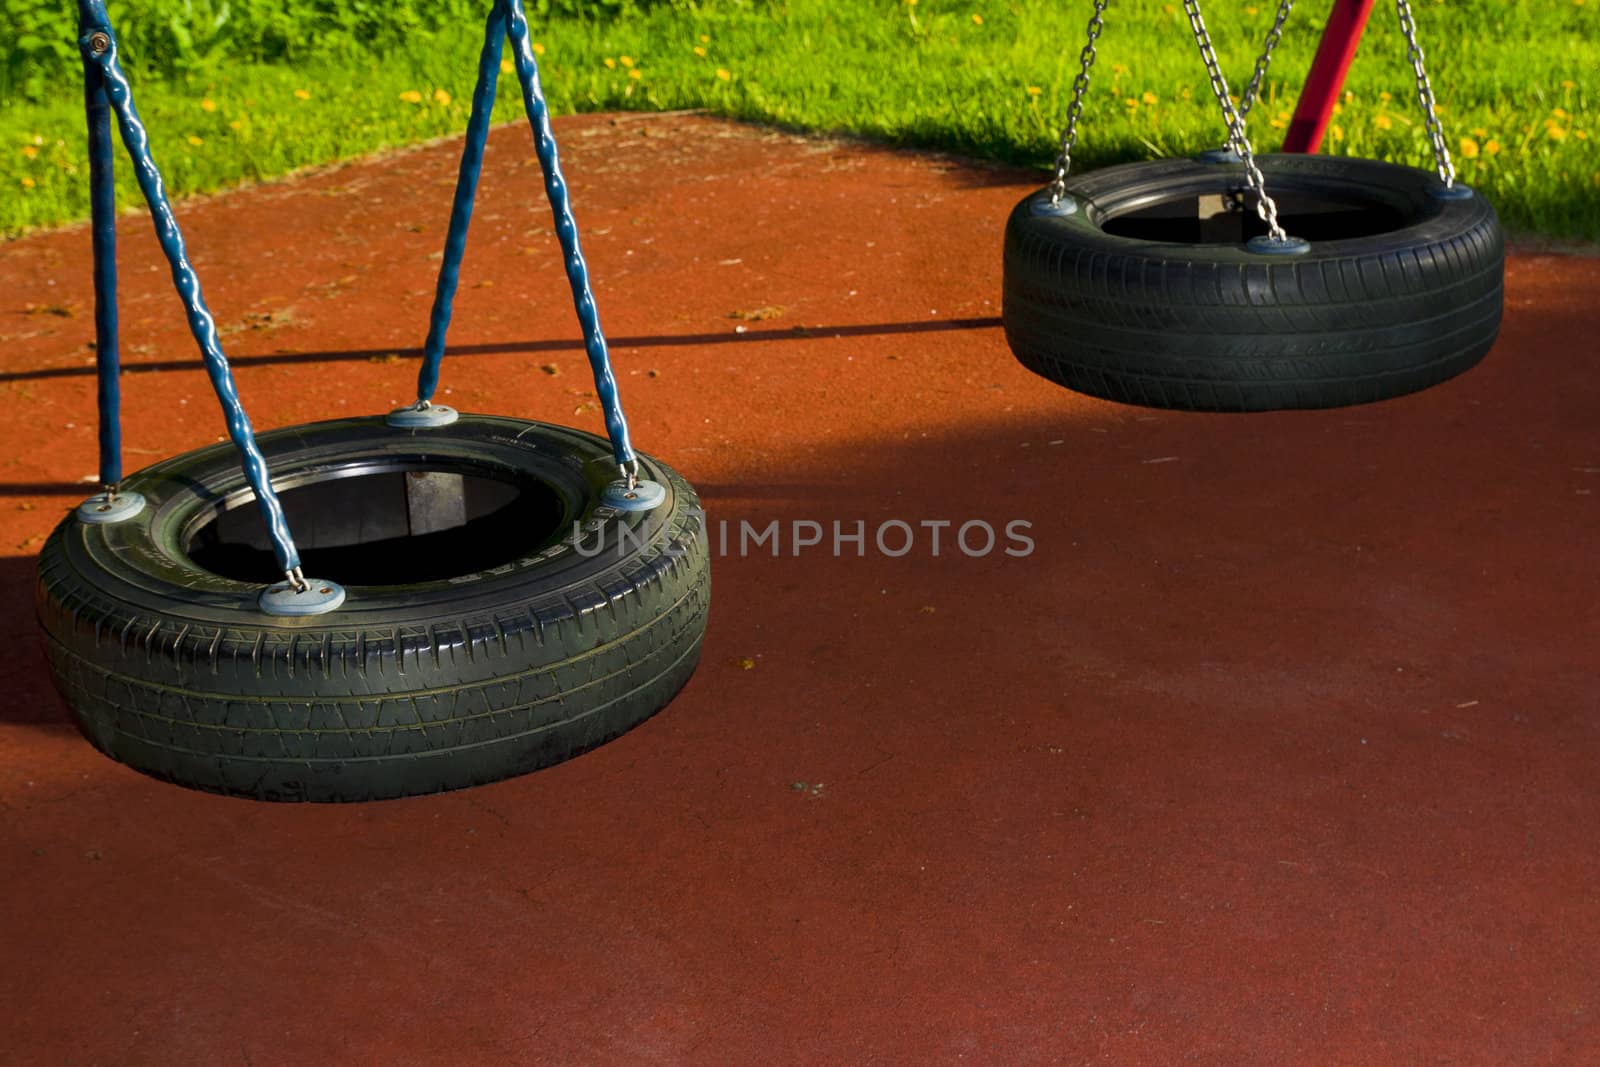 Black tire swings in a playground